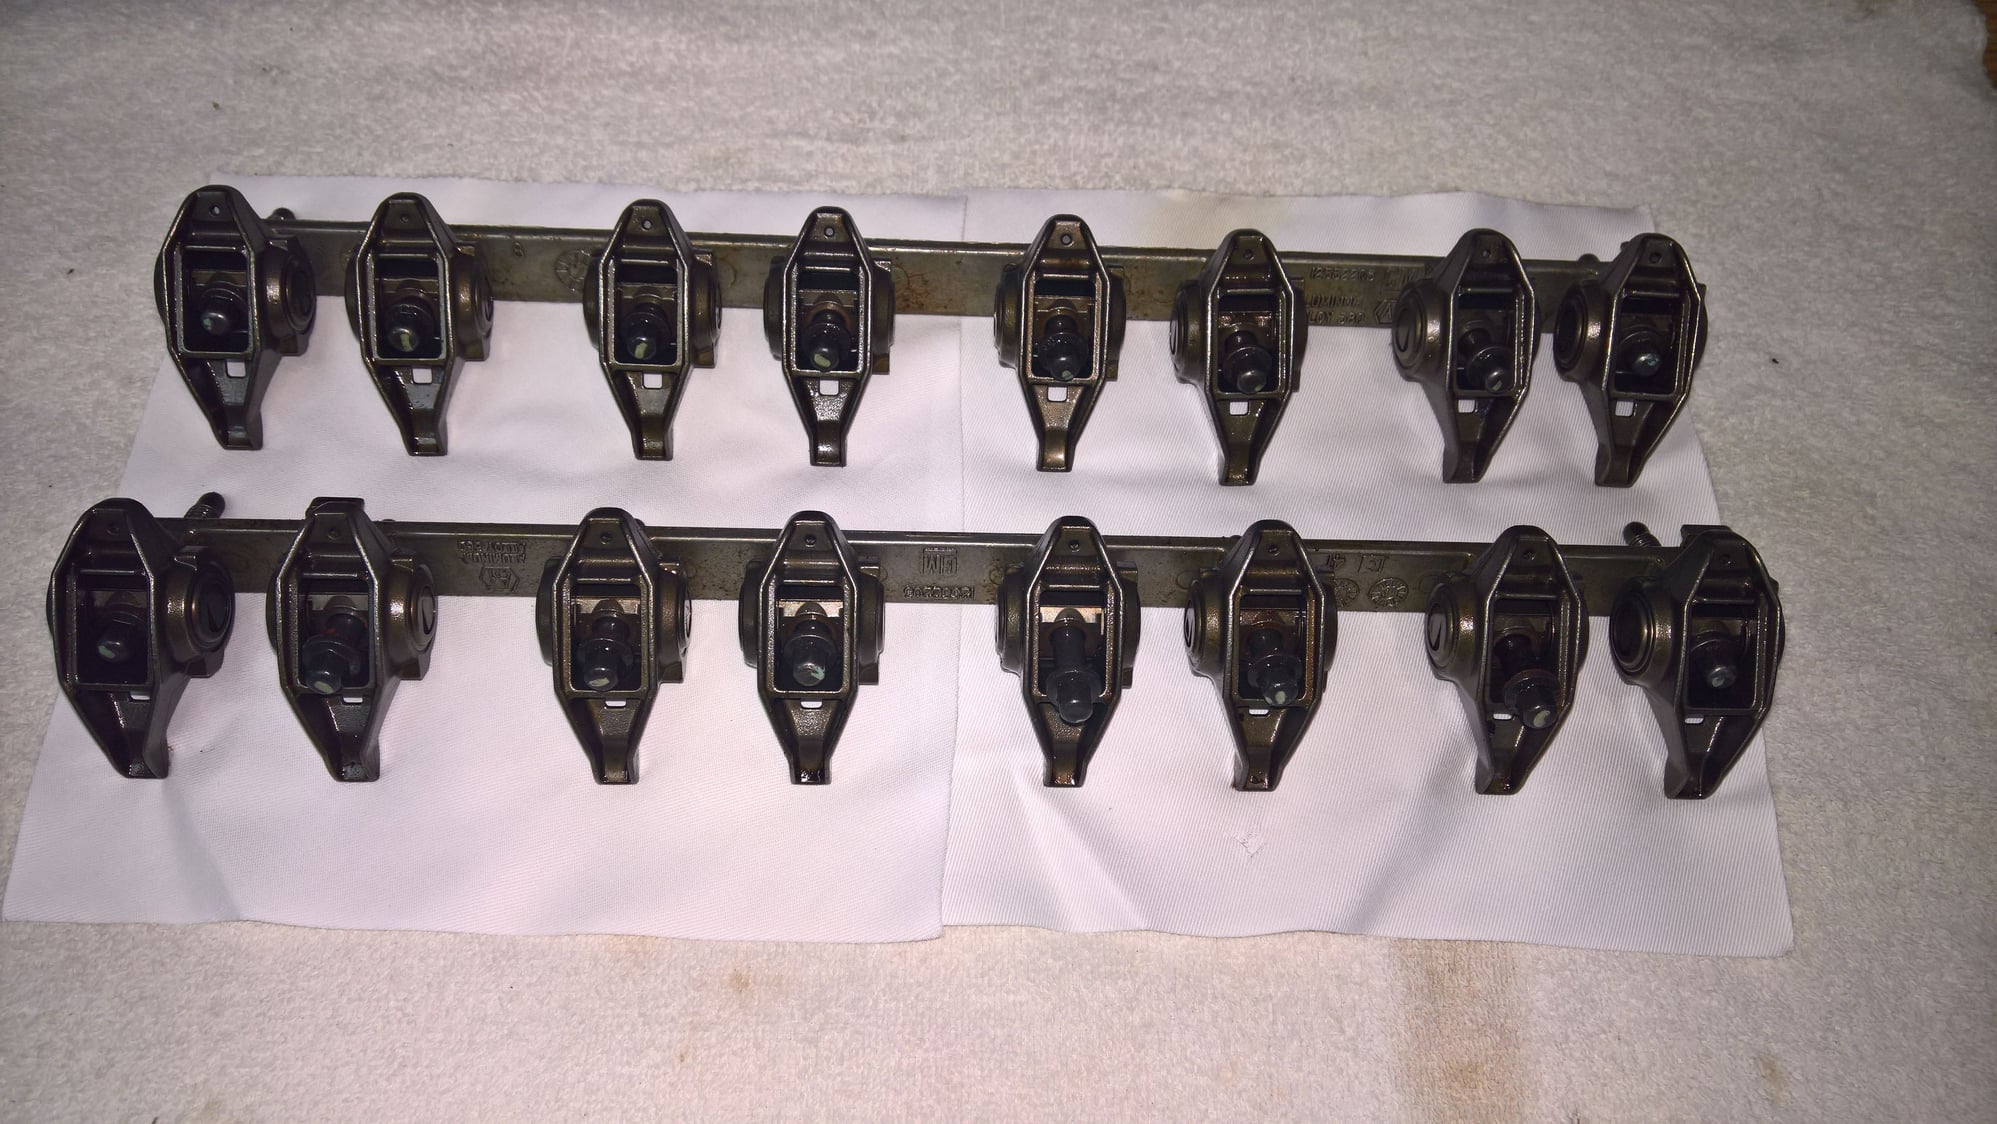 Engine - Internals - Ls2 ls6 5.3 / 6.0 rocker arms / stands / bolts  ( take off's ) - Used - Westland, MI 48185, United States